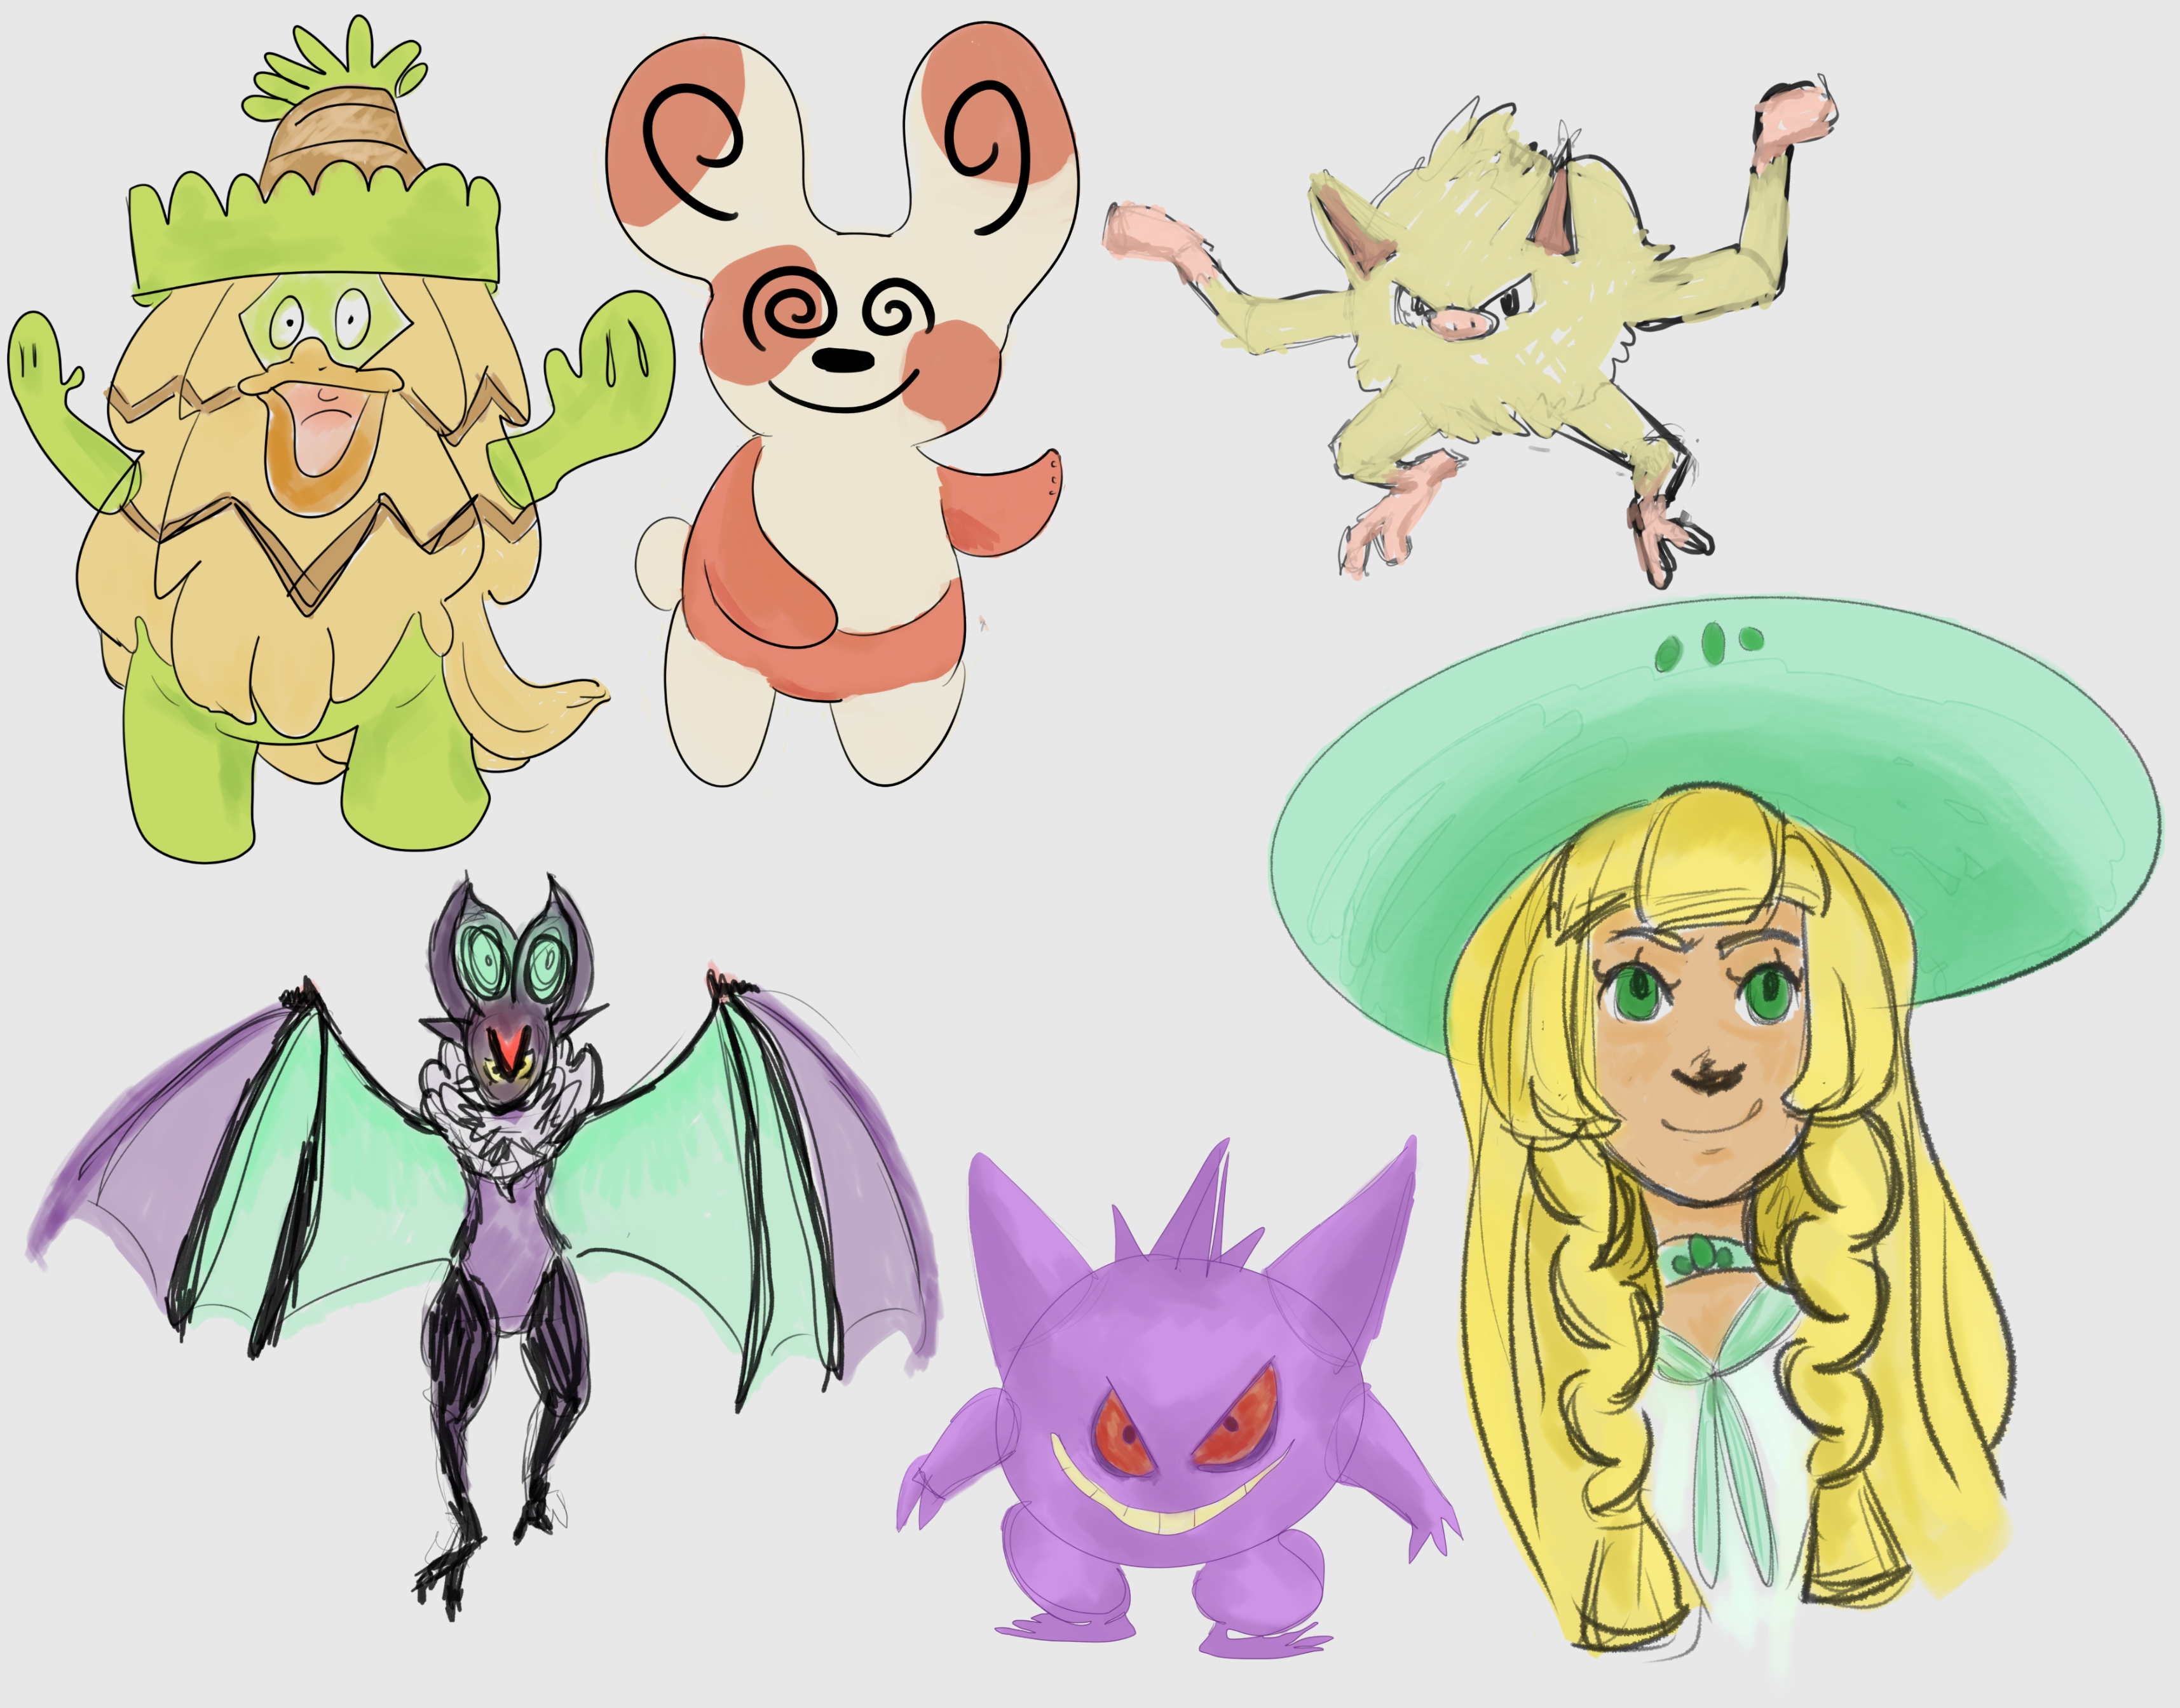 00pokemonsketchingss.png